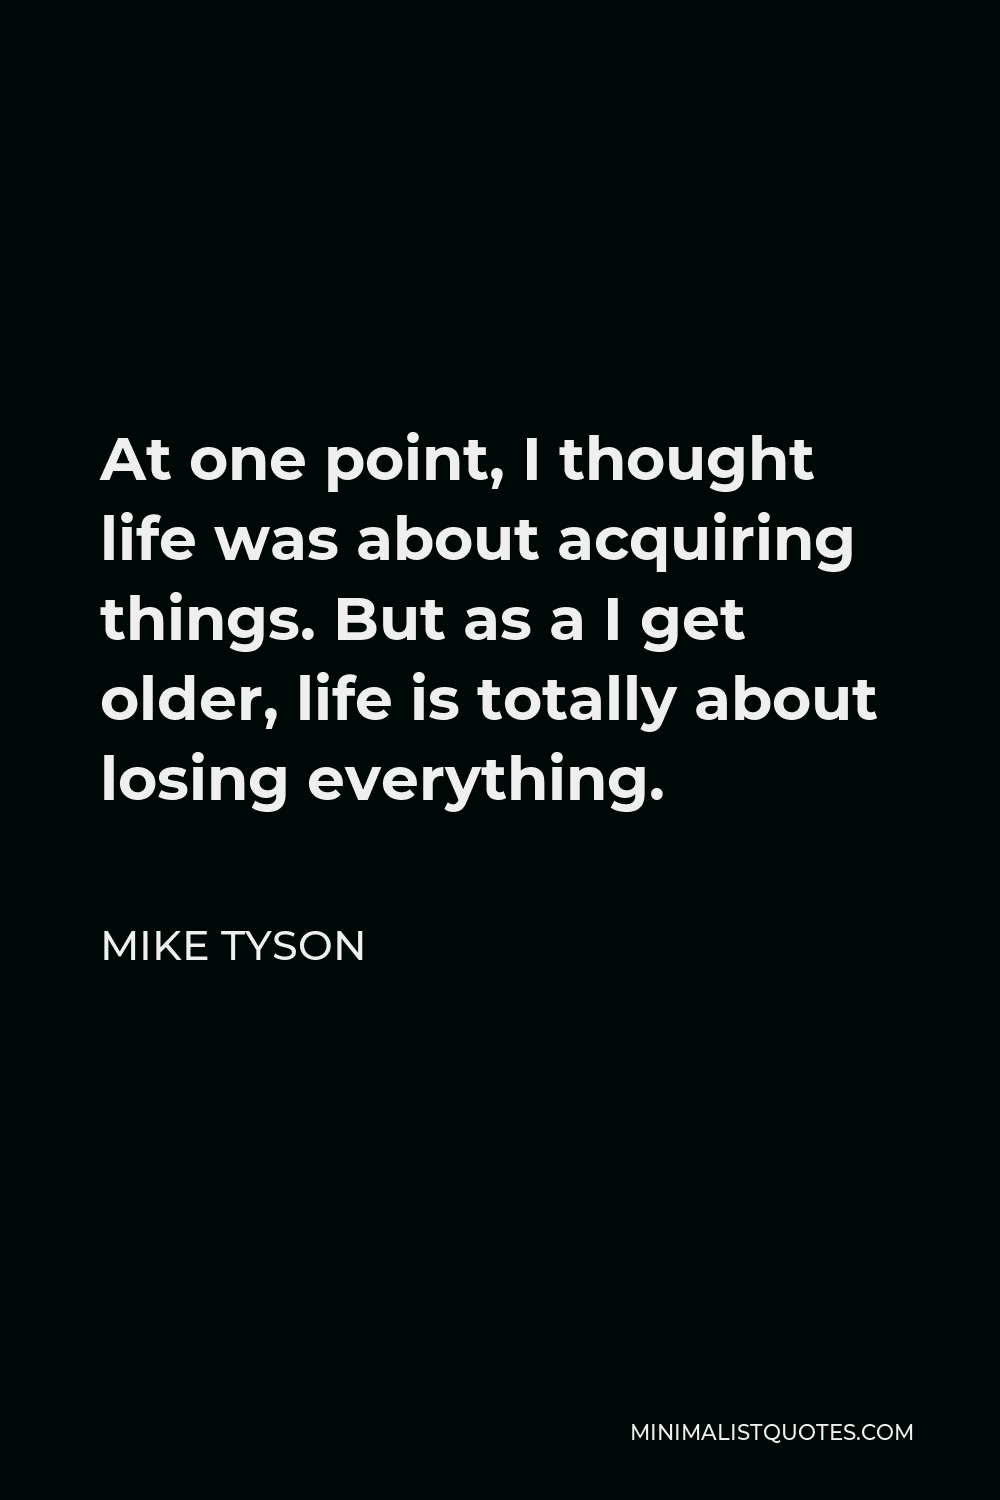 Mike Tyson Quote - At one point, I thought life was about acquiring things. But as a I get older, life is totally about losing everything.